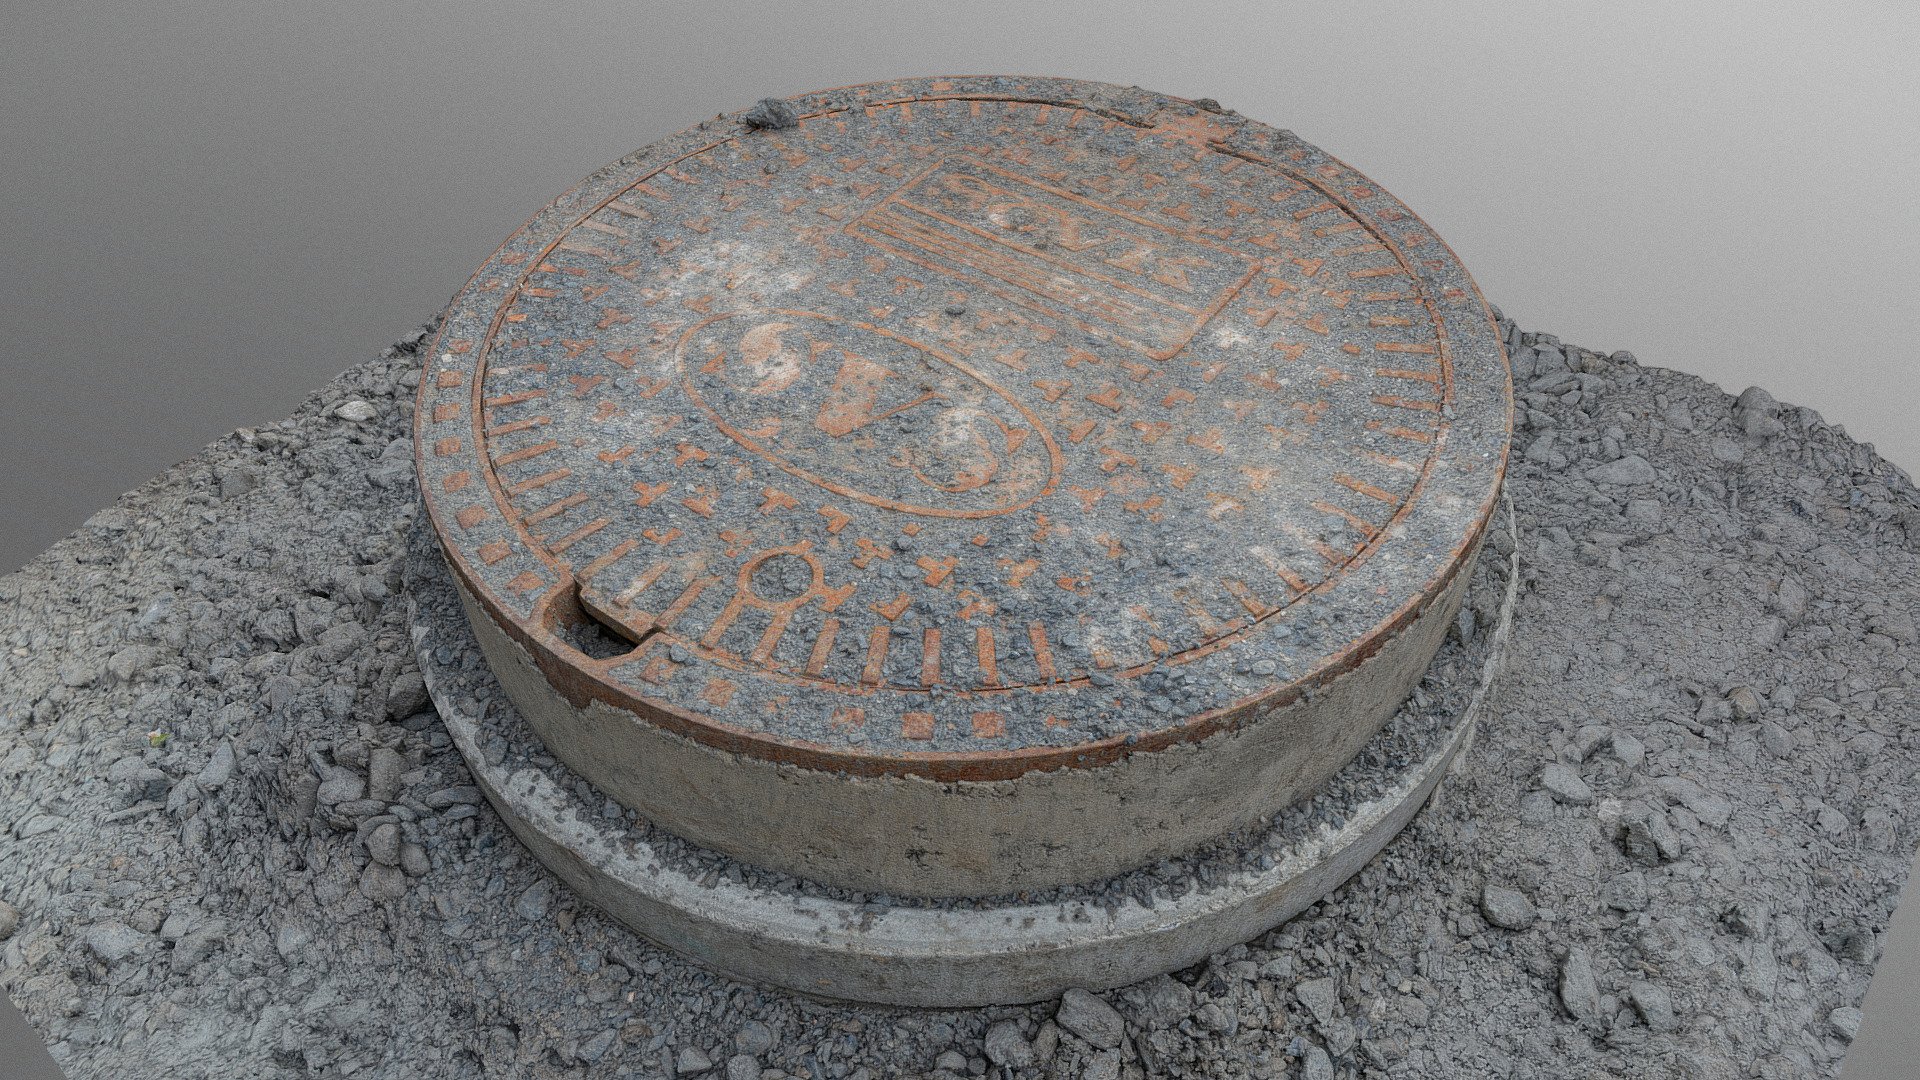 Manhole Sewer hatch cover in gravel, sewer canal lid circle hatch cap unearthed in construction road

Photogrammetry scan (100 x 24 MP, 3x16K texture + HD Normals) - Manhole Sewer hatch cover in gravel - Buy Royalty Free 3D model by matousekfoto 3d model